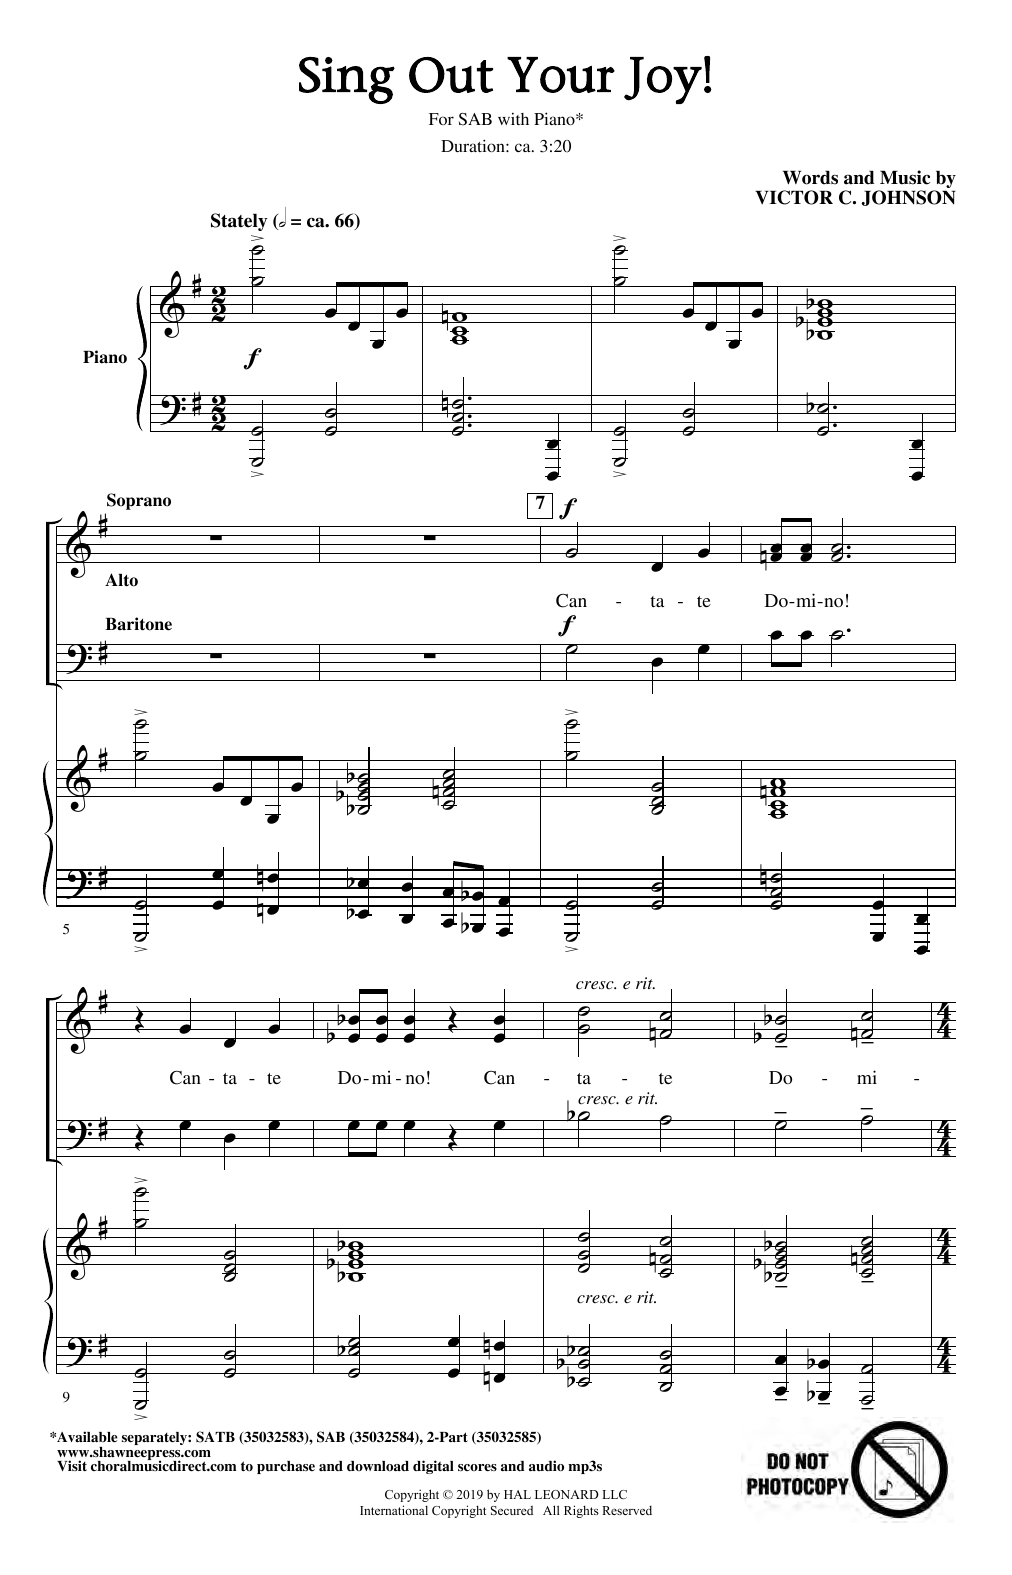 Download Victor C. Johnson Sing Out Your Joy! Sheet Music